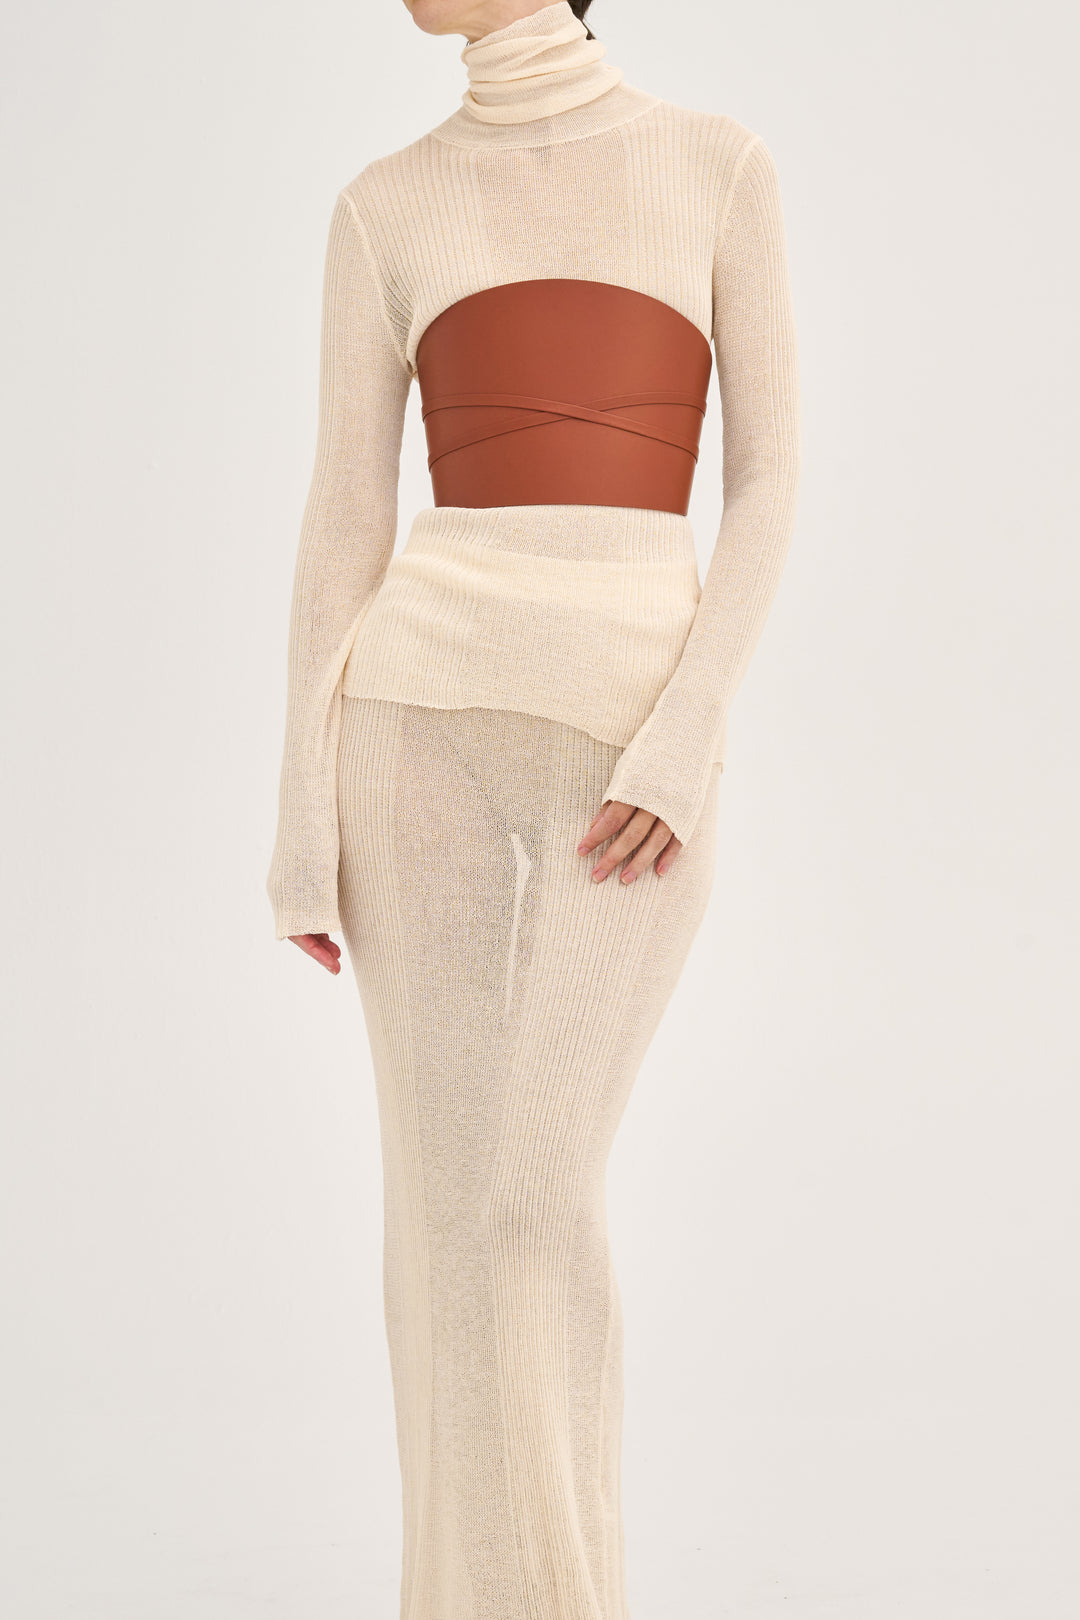 Déhanche Undone Corset in brown leather, styled over a cream knitted dress with long sleeves and high neckline, highlighting a chic front view.